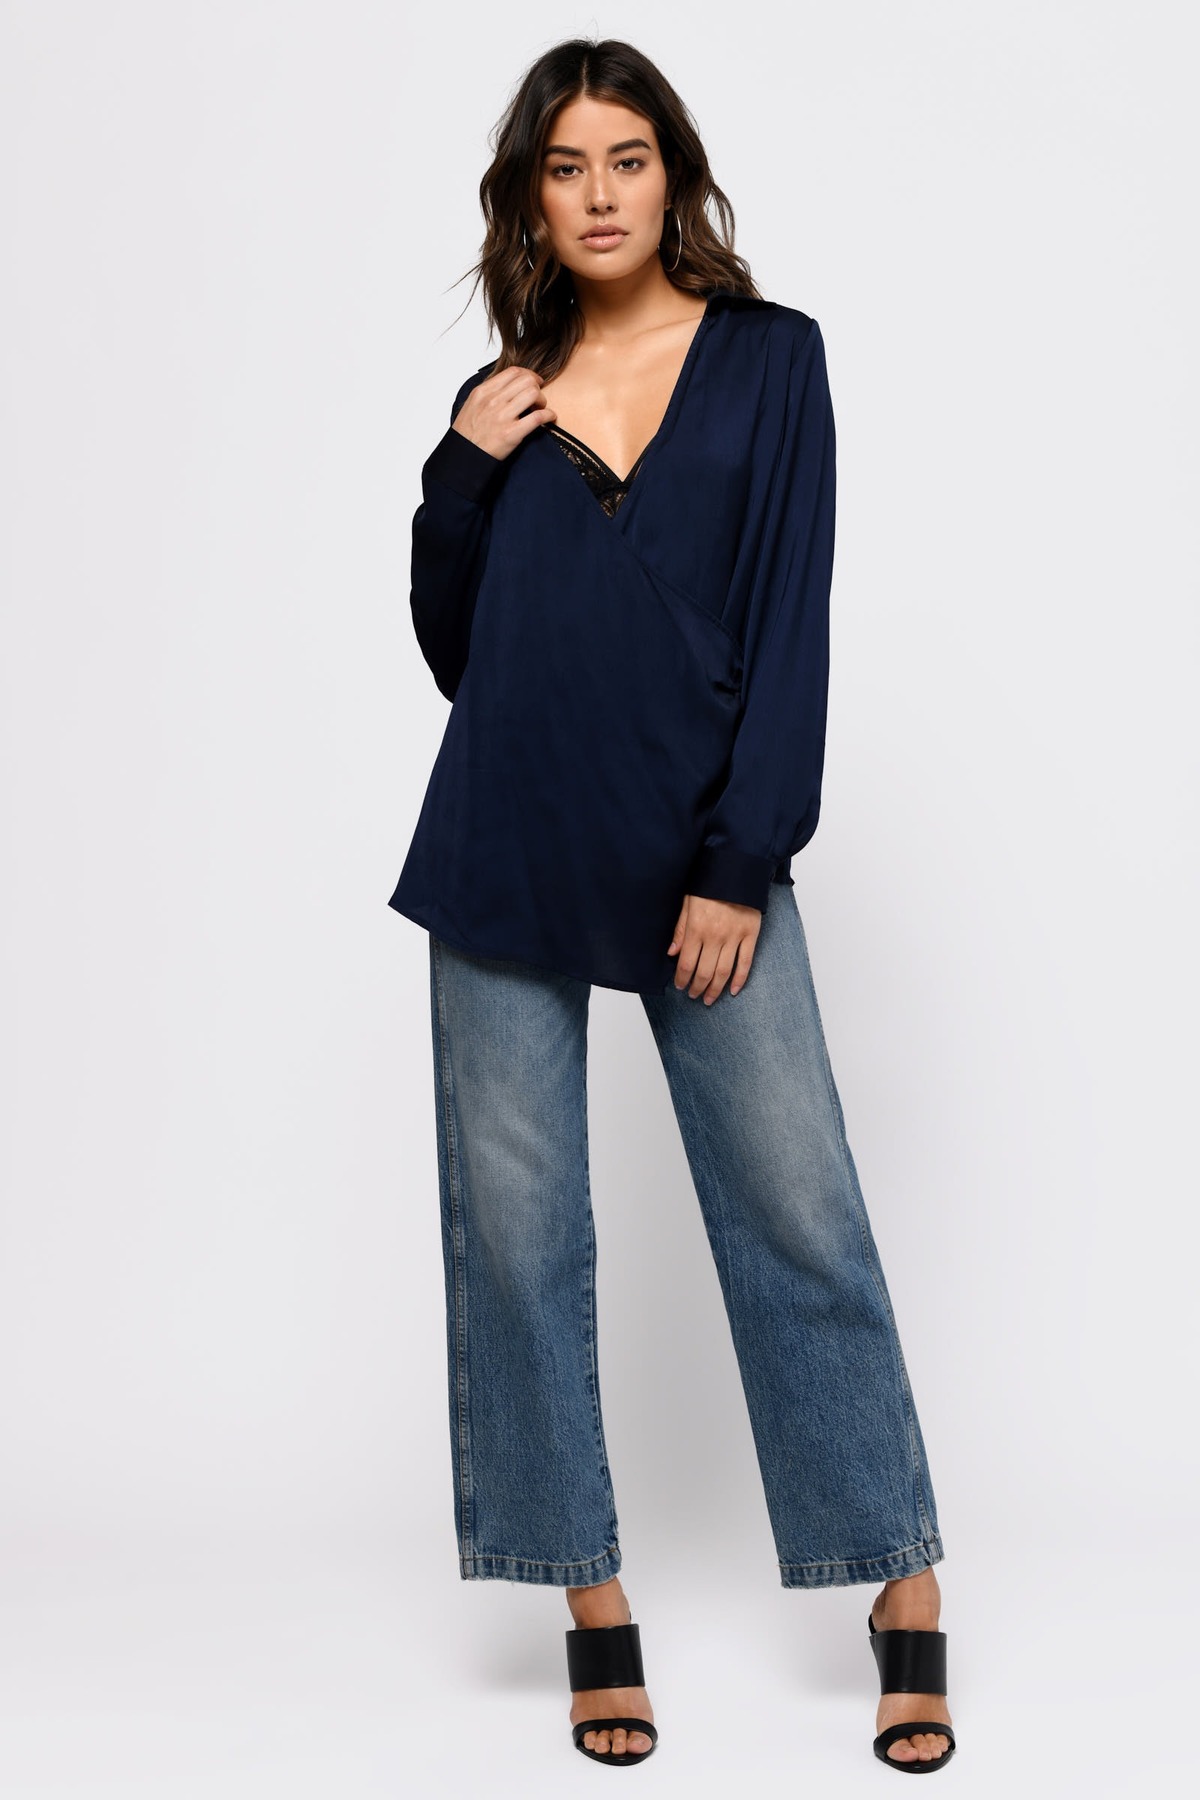 Cute Blouse - Navy Blue Top - Long Sleeve Top - Satin Collared Blouse